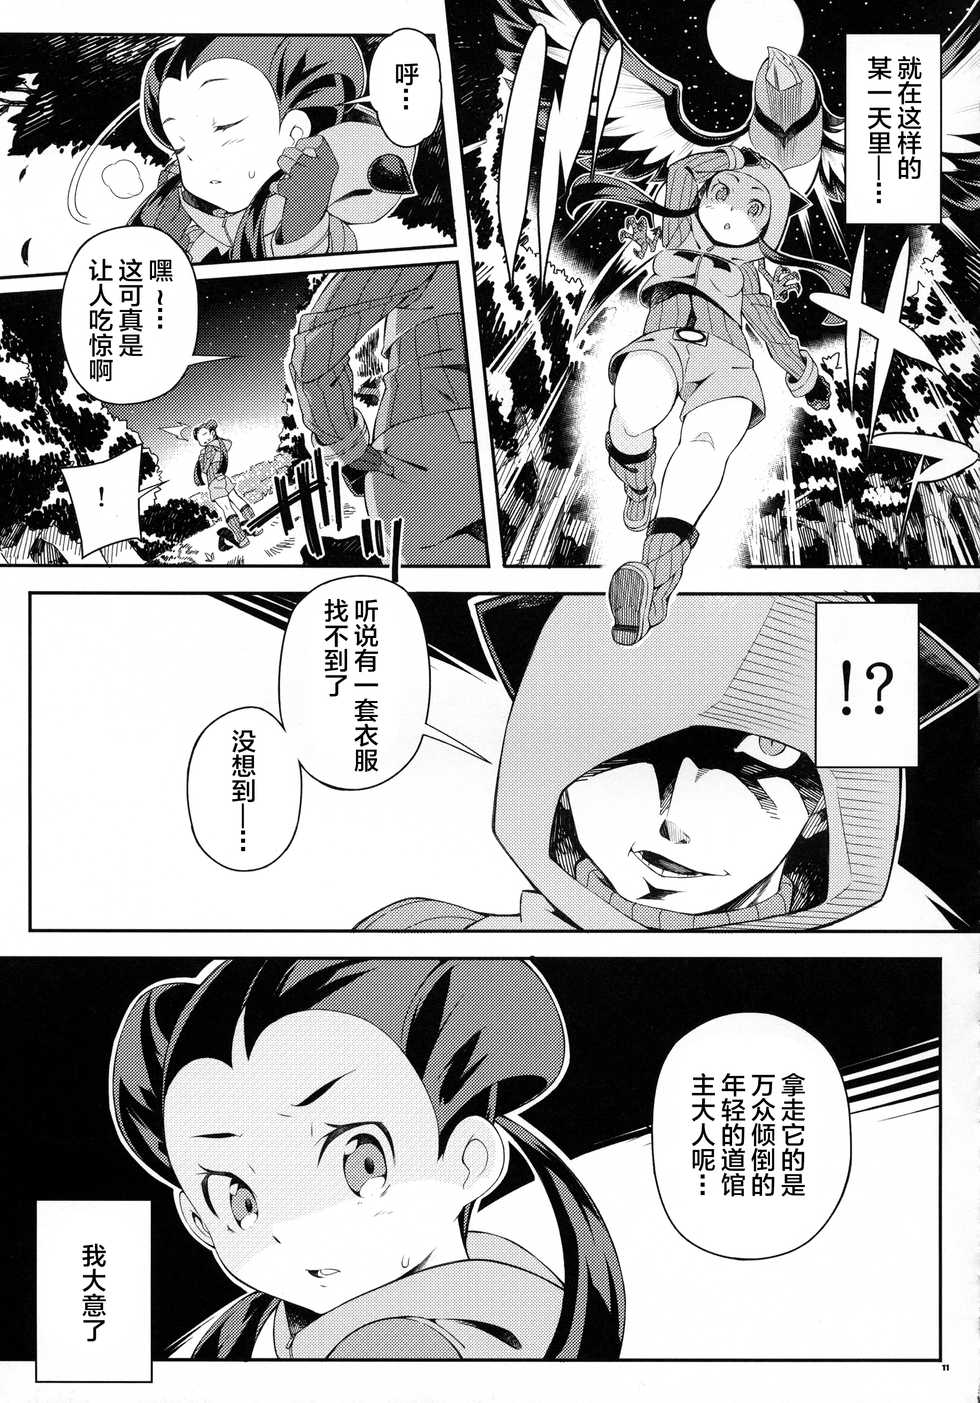 (C89) [PilotStar (Iso Nogi)] ANOTHER WORLD (Pokémon Omega Ruby and Alpha Sapphire) [Chinese] [lolipoi汉化组] - Page 11